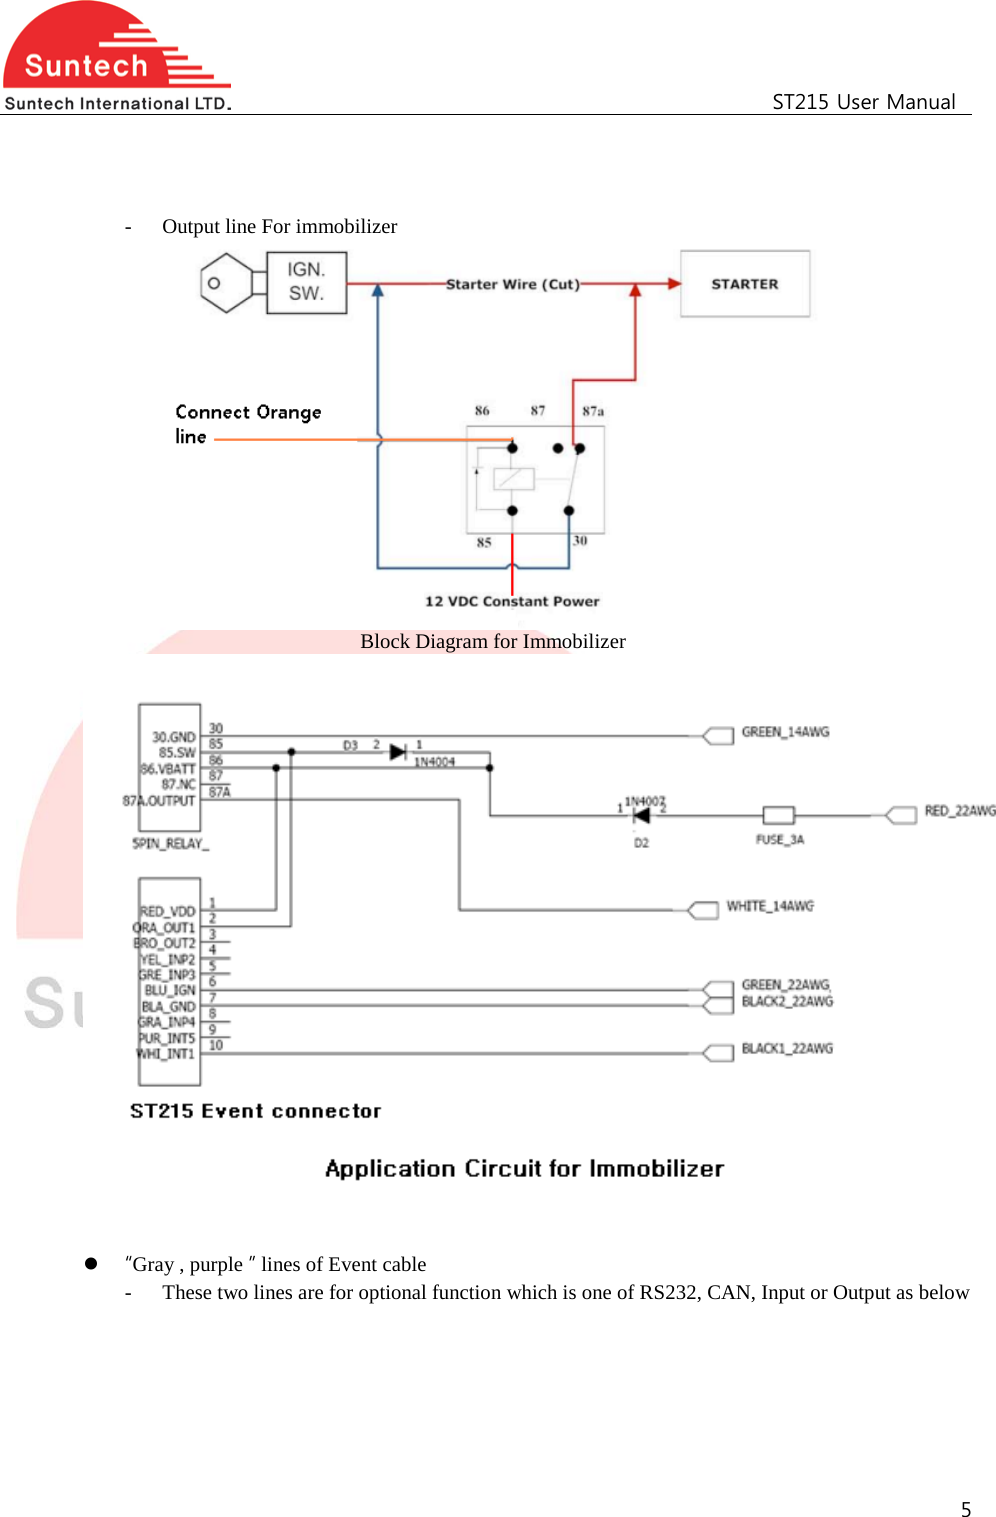                                                     ST215 User Manual           - Output line For immobilizer      Block Diagram for Immobilizer      “Gray , purple ” lines of Event cable   - These two lines are for optional function which is one of RS232, CAN, Input or Output as below  5  